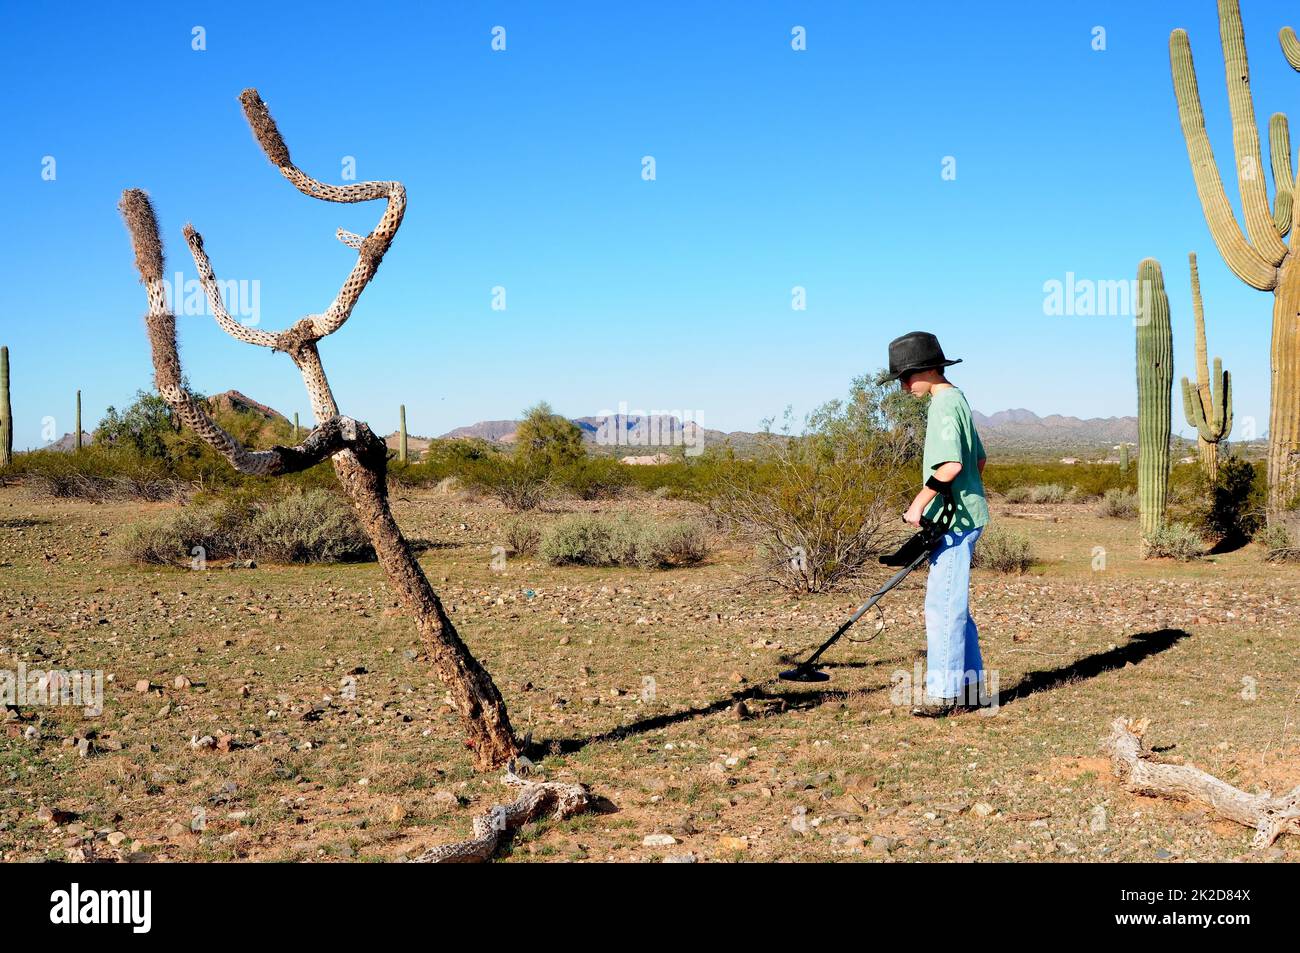 Boy with a metal detector treasure hunting Stock Photo